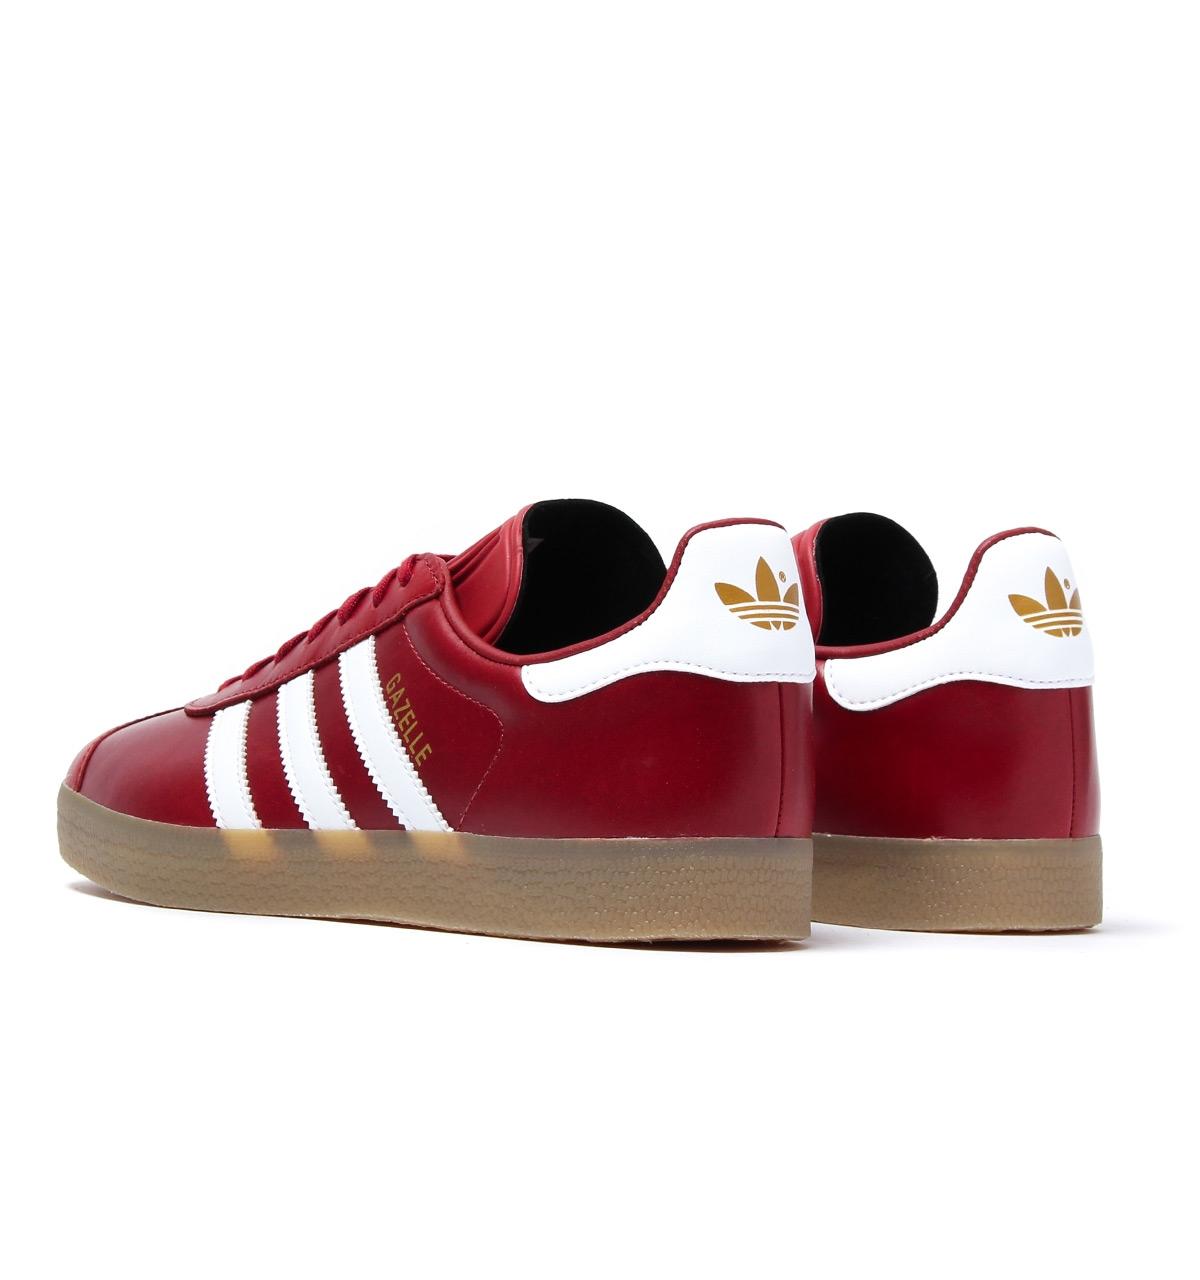 adidas Originals Mystery Red Leather Gazelle Trainers for Men | Lyst